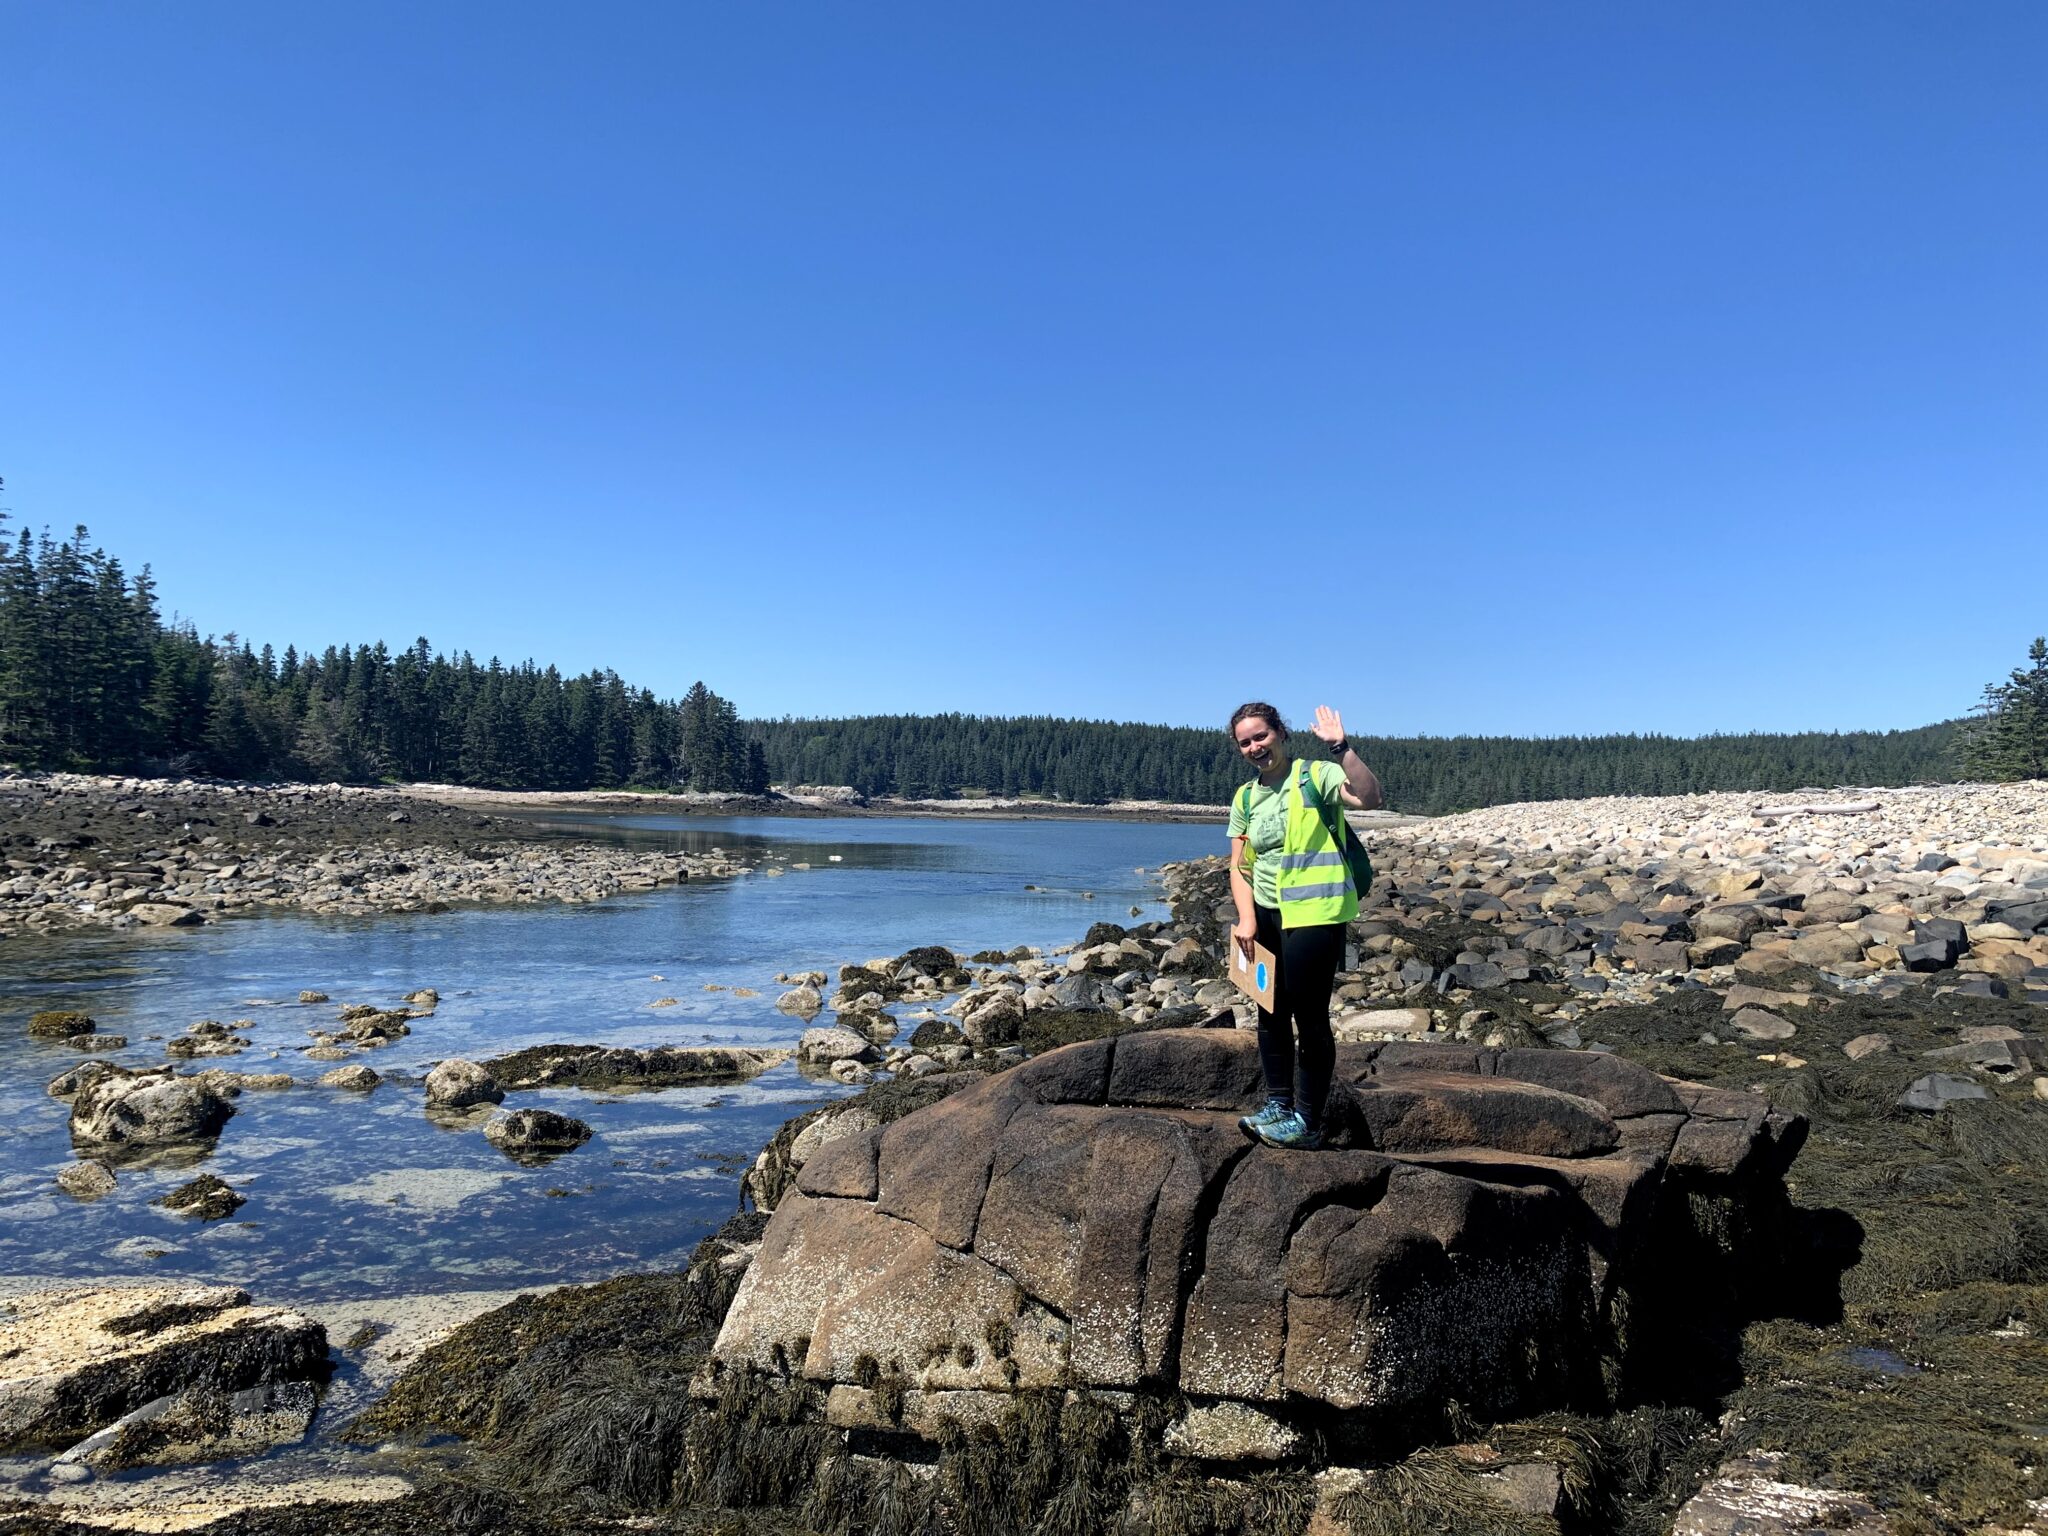 A smiling person stands on a rock along the shoreline, waving, with water, rocky shoreline, and forested shoreline in background.